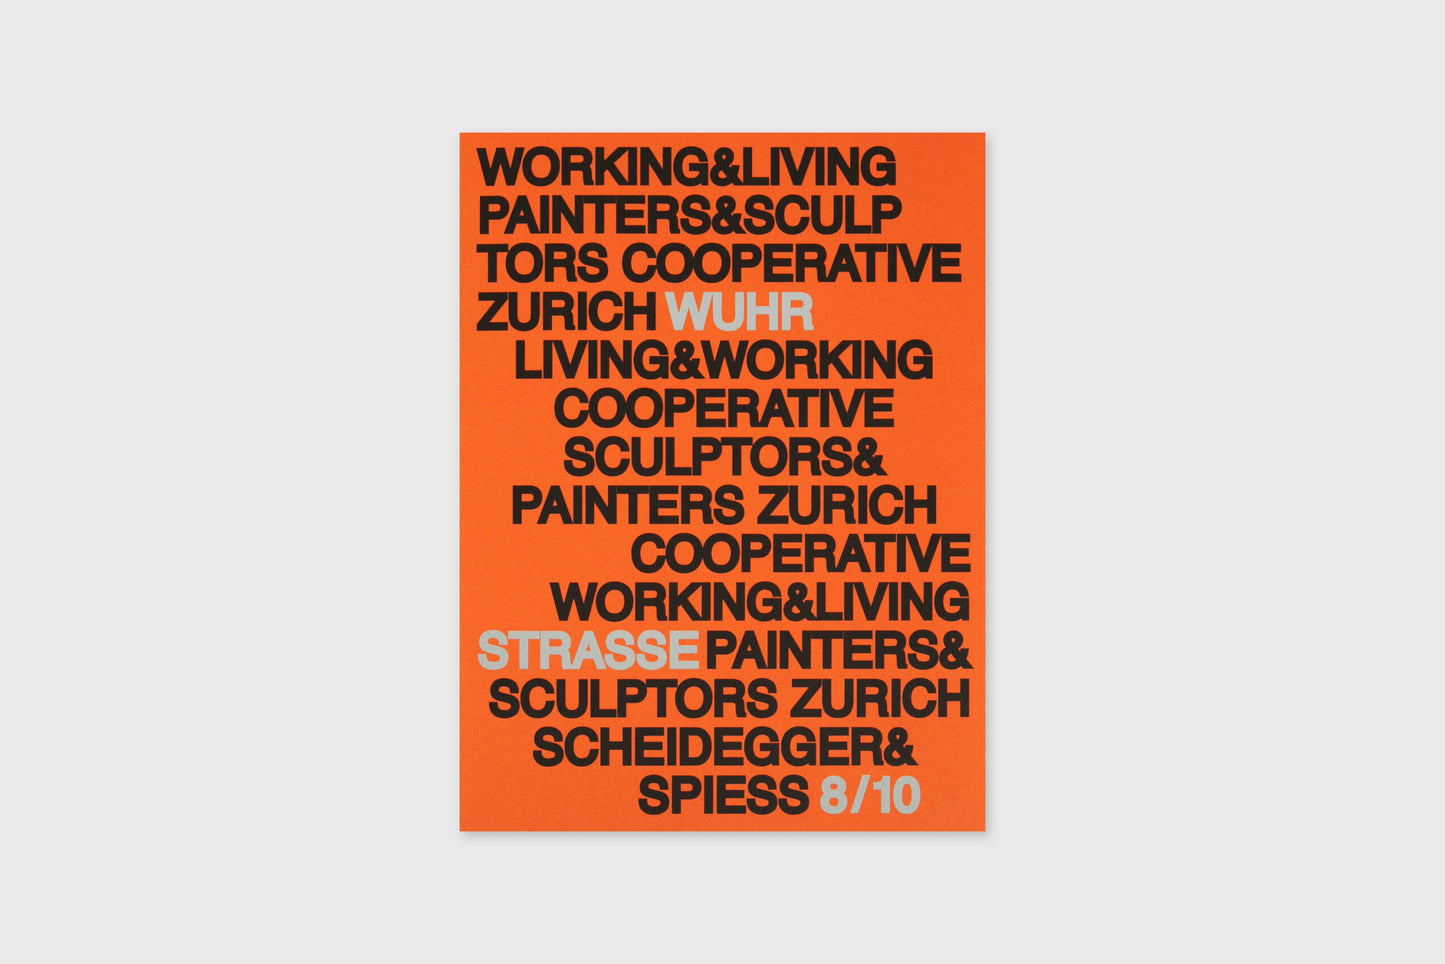 Working and Living: History and Presence of Studio House Wuhrstrasse 8/10